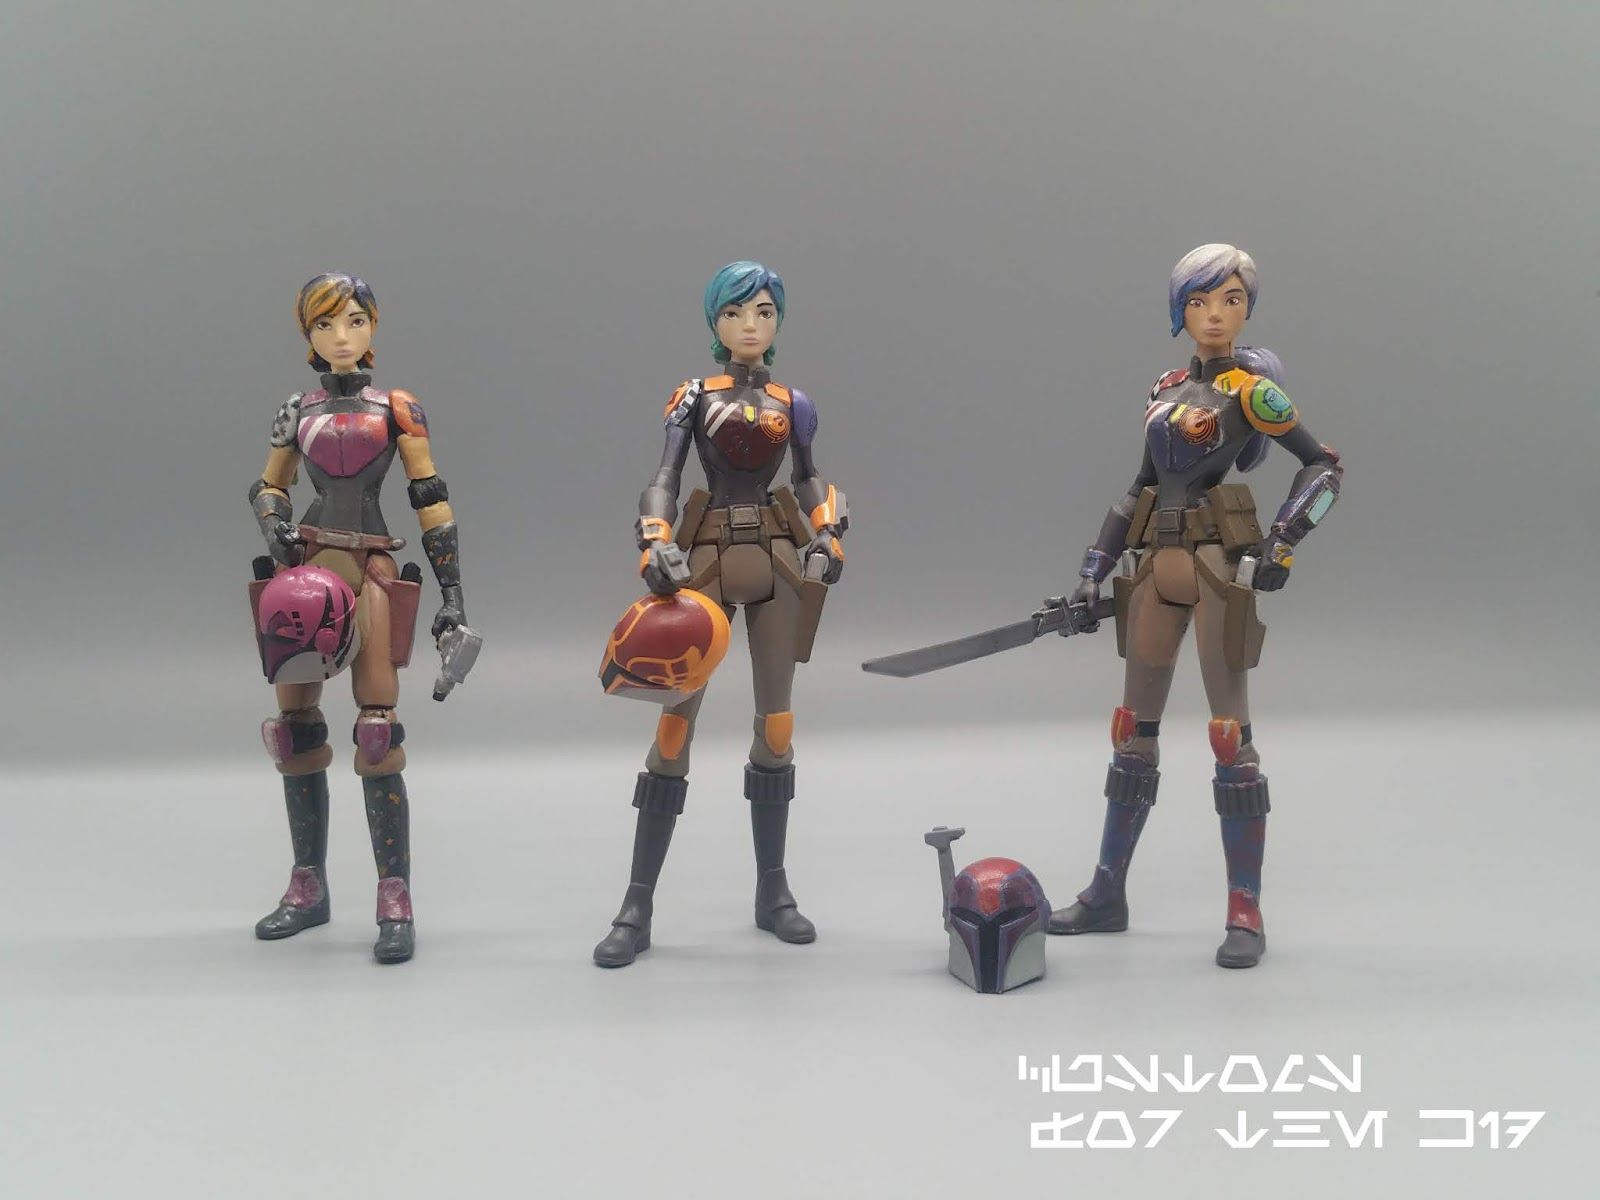 Star Wars: Customs for the Kid: Star Wars Rebels Sabine Wren Collection from Customs for